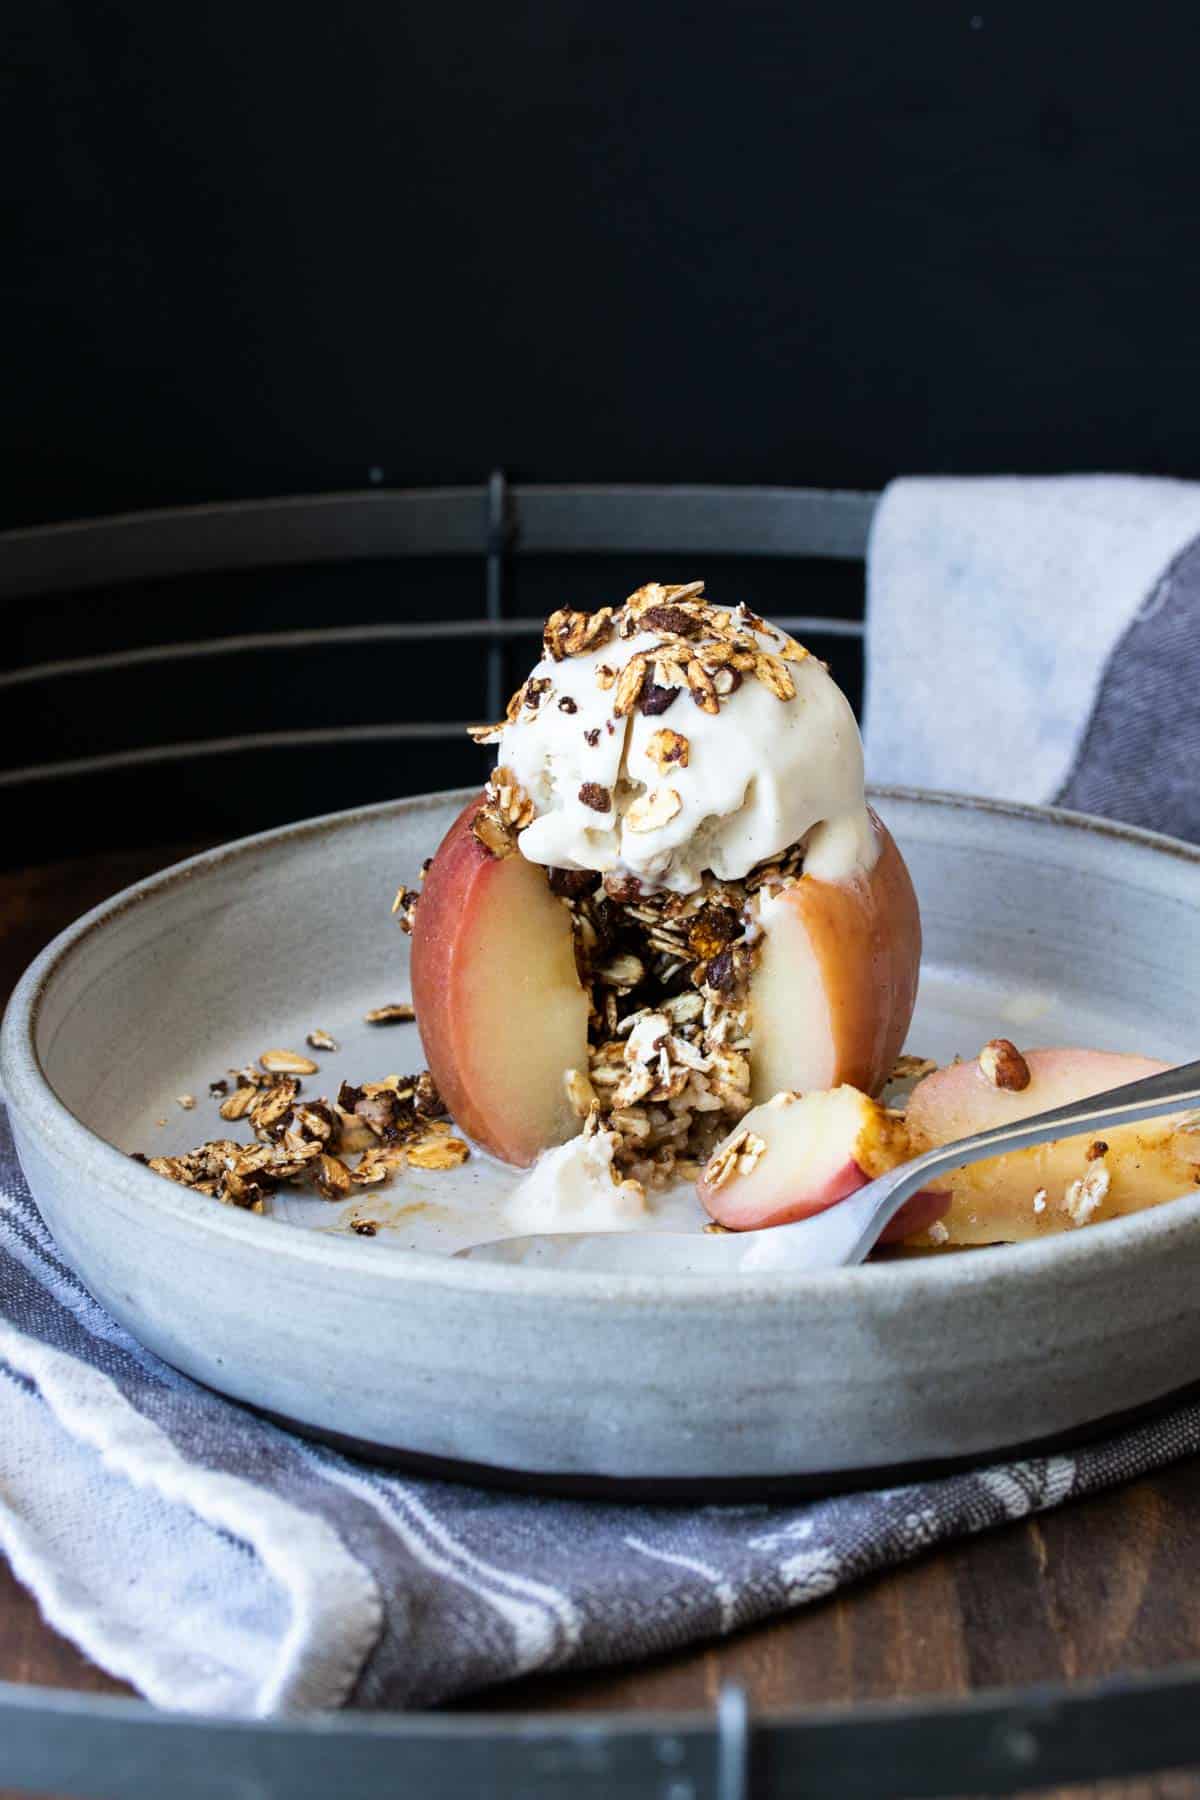 A baked apple with a piece out filled with oats on a grey plate